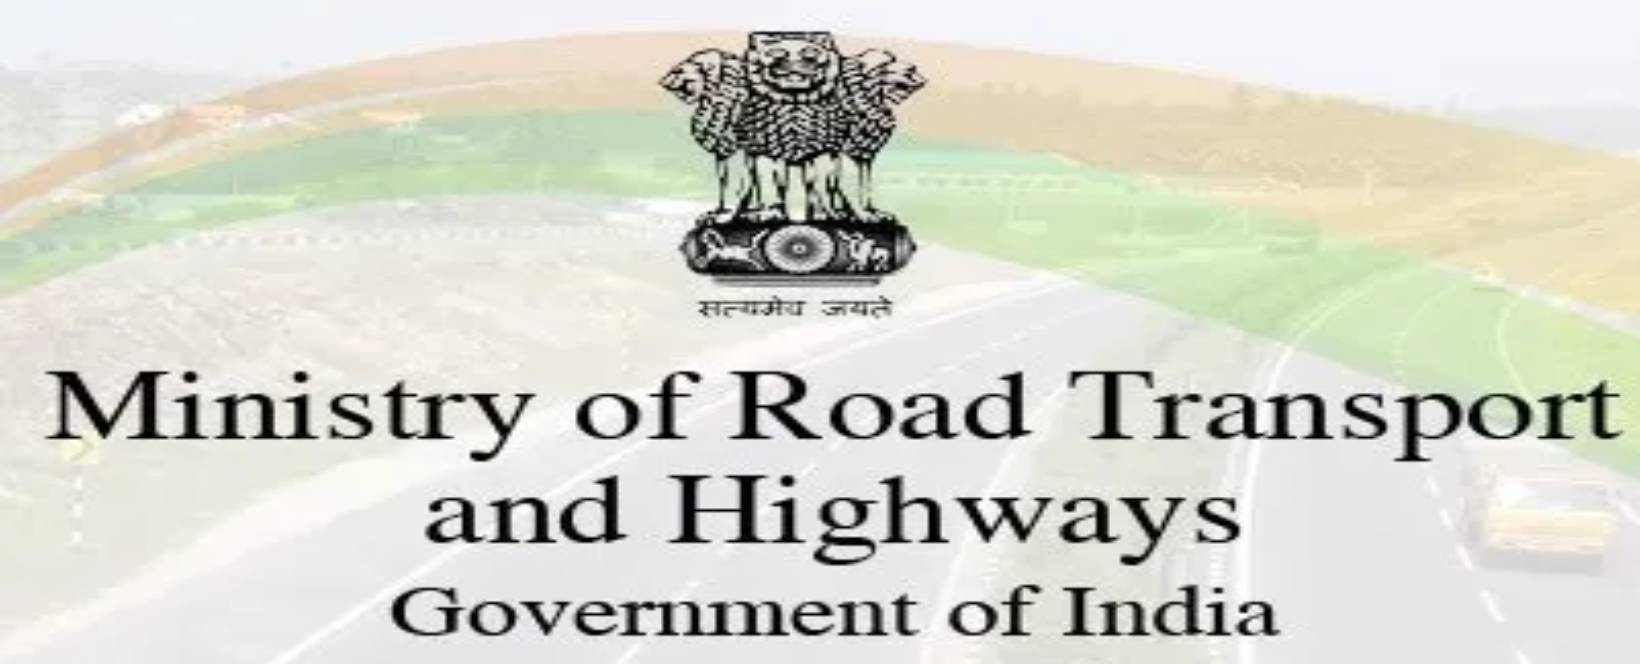 Govt brings new norms to assist road accident victims